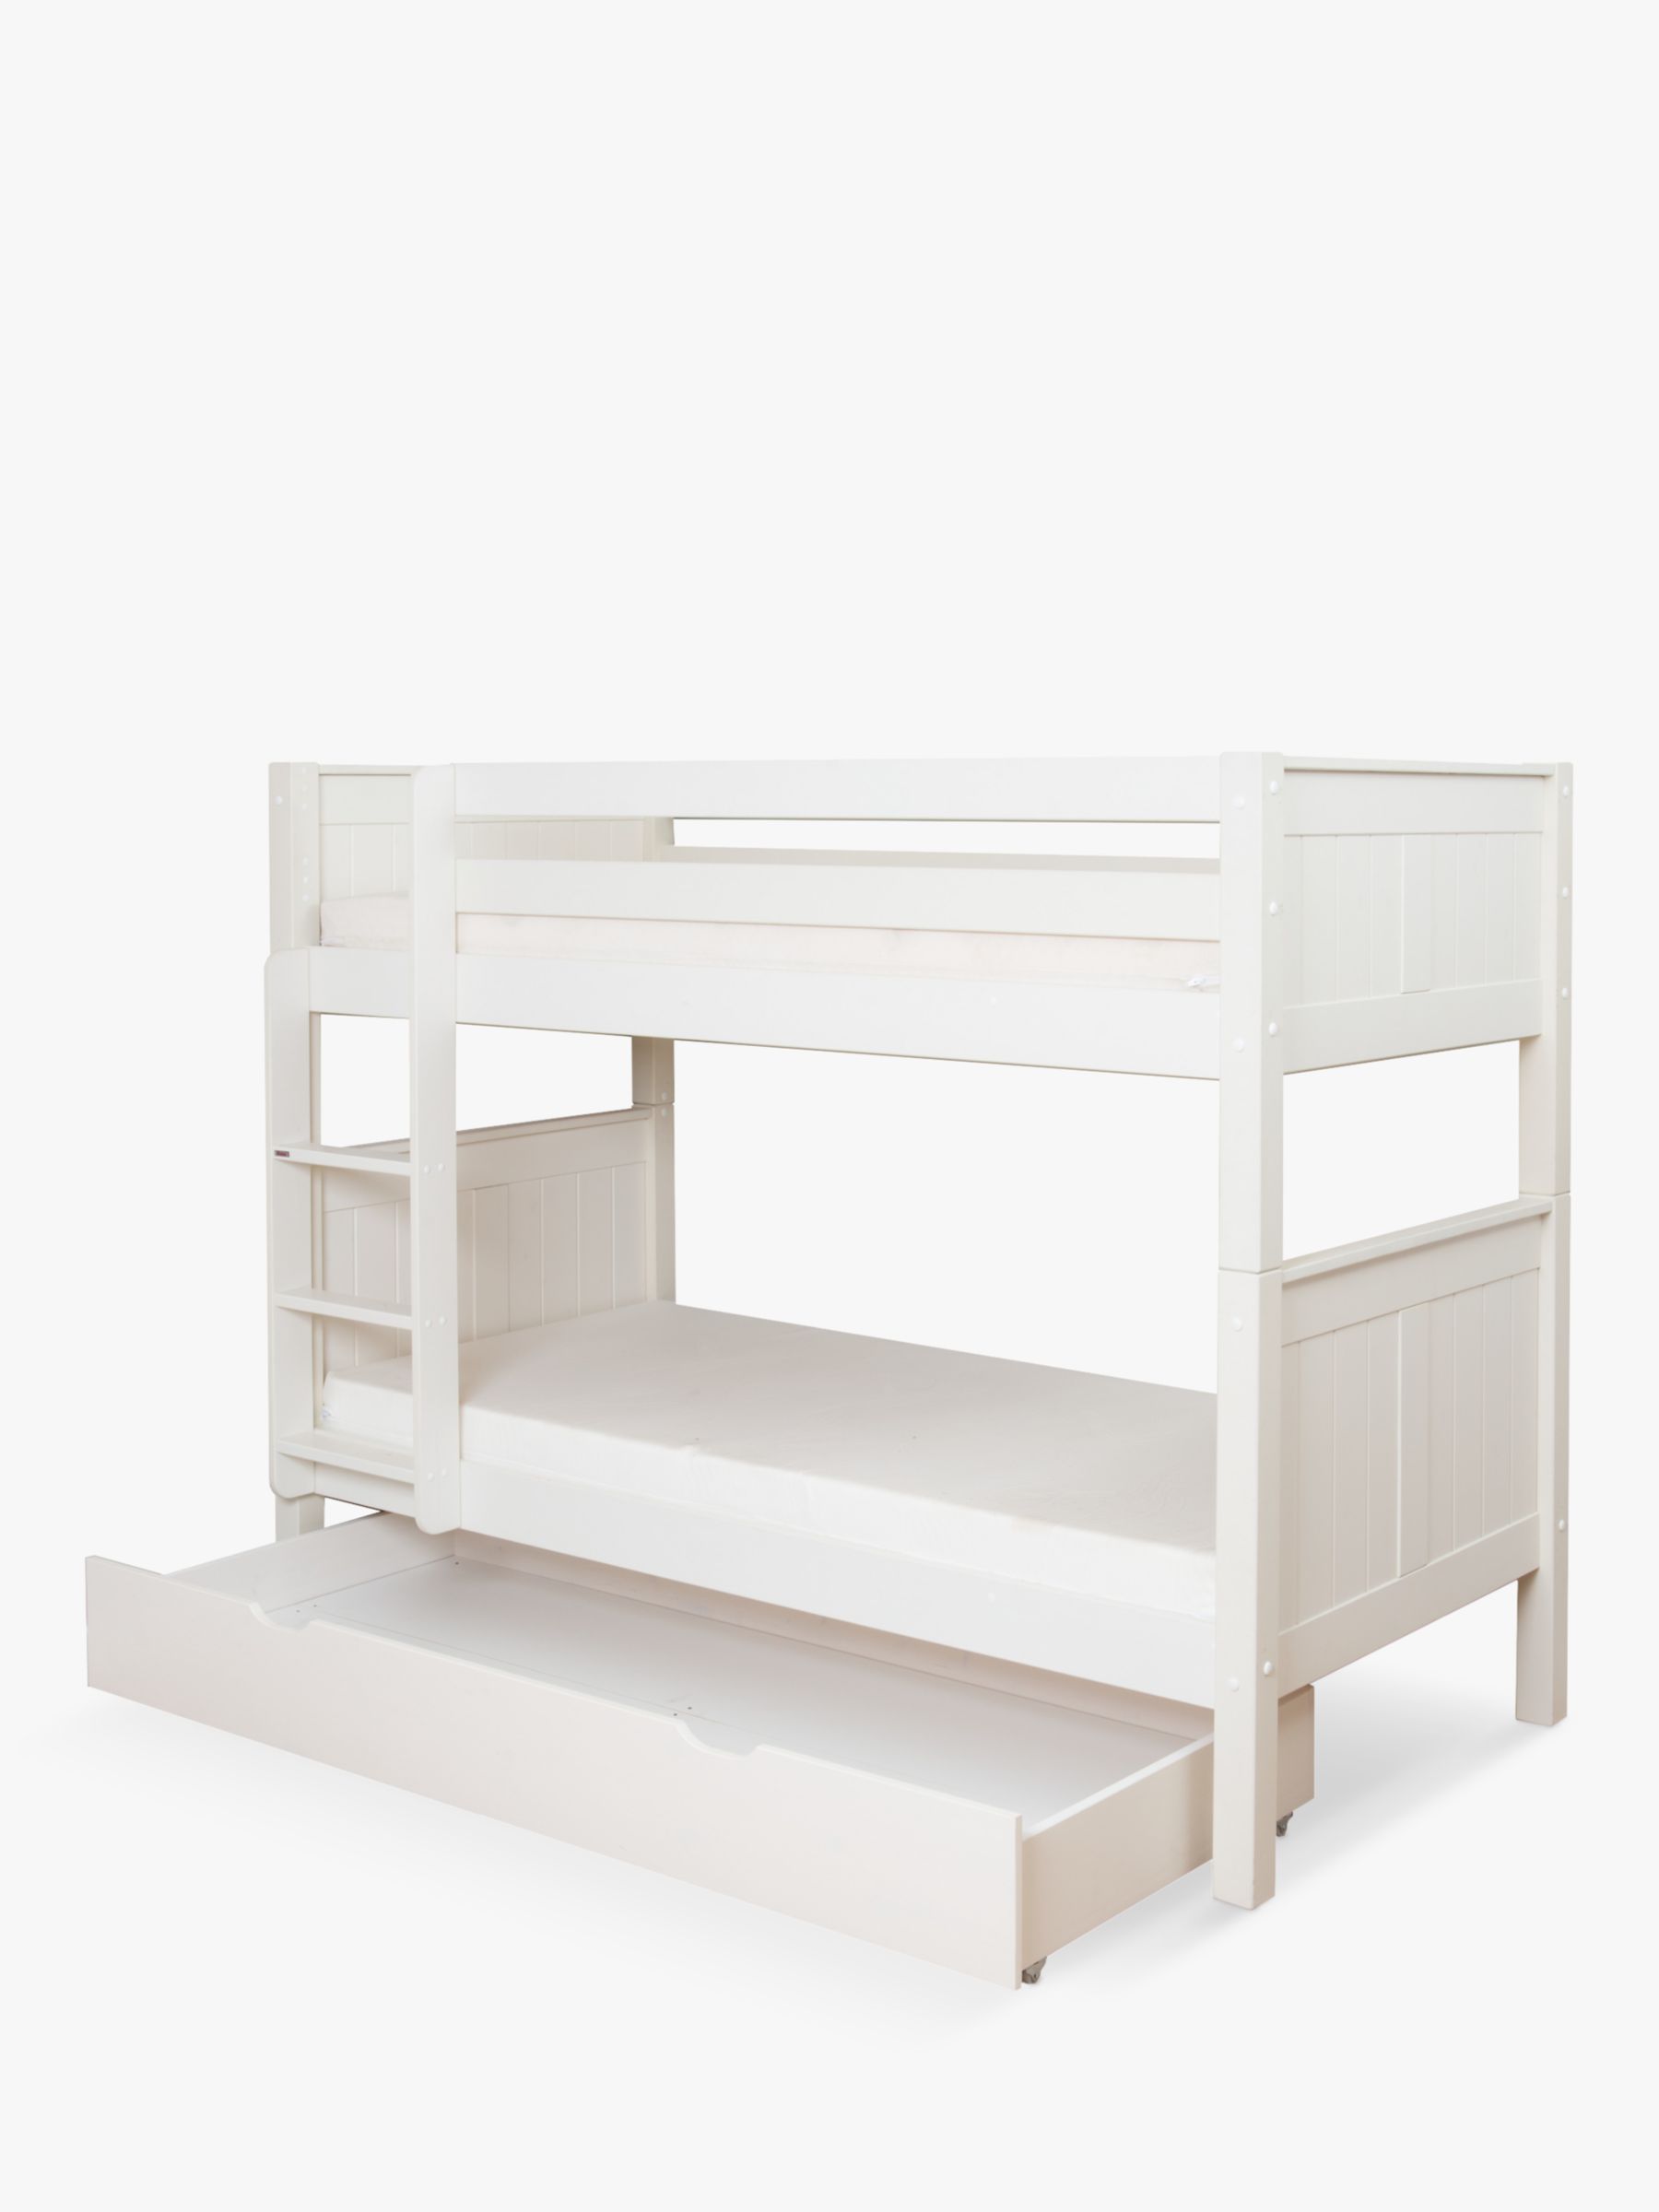 Stompa Classic Child Compliant Bunk Bed, White Bunk Bed With Trundle